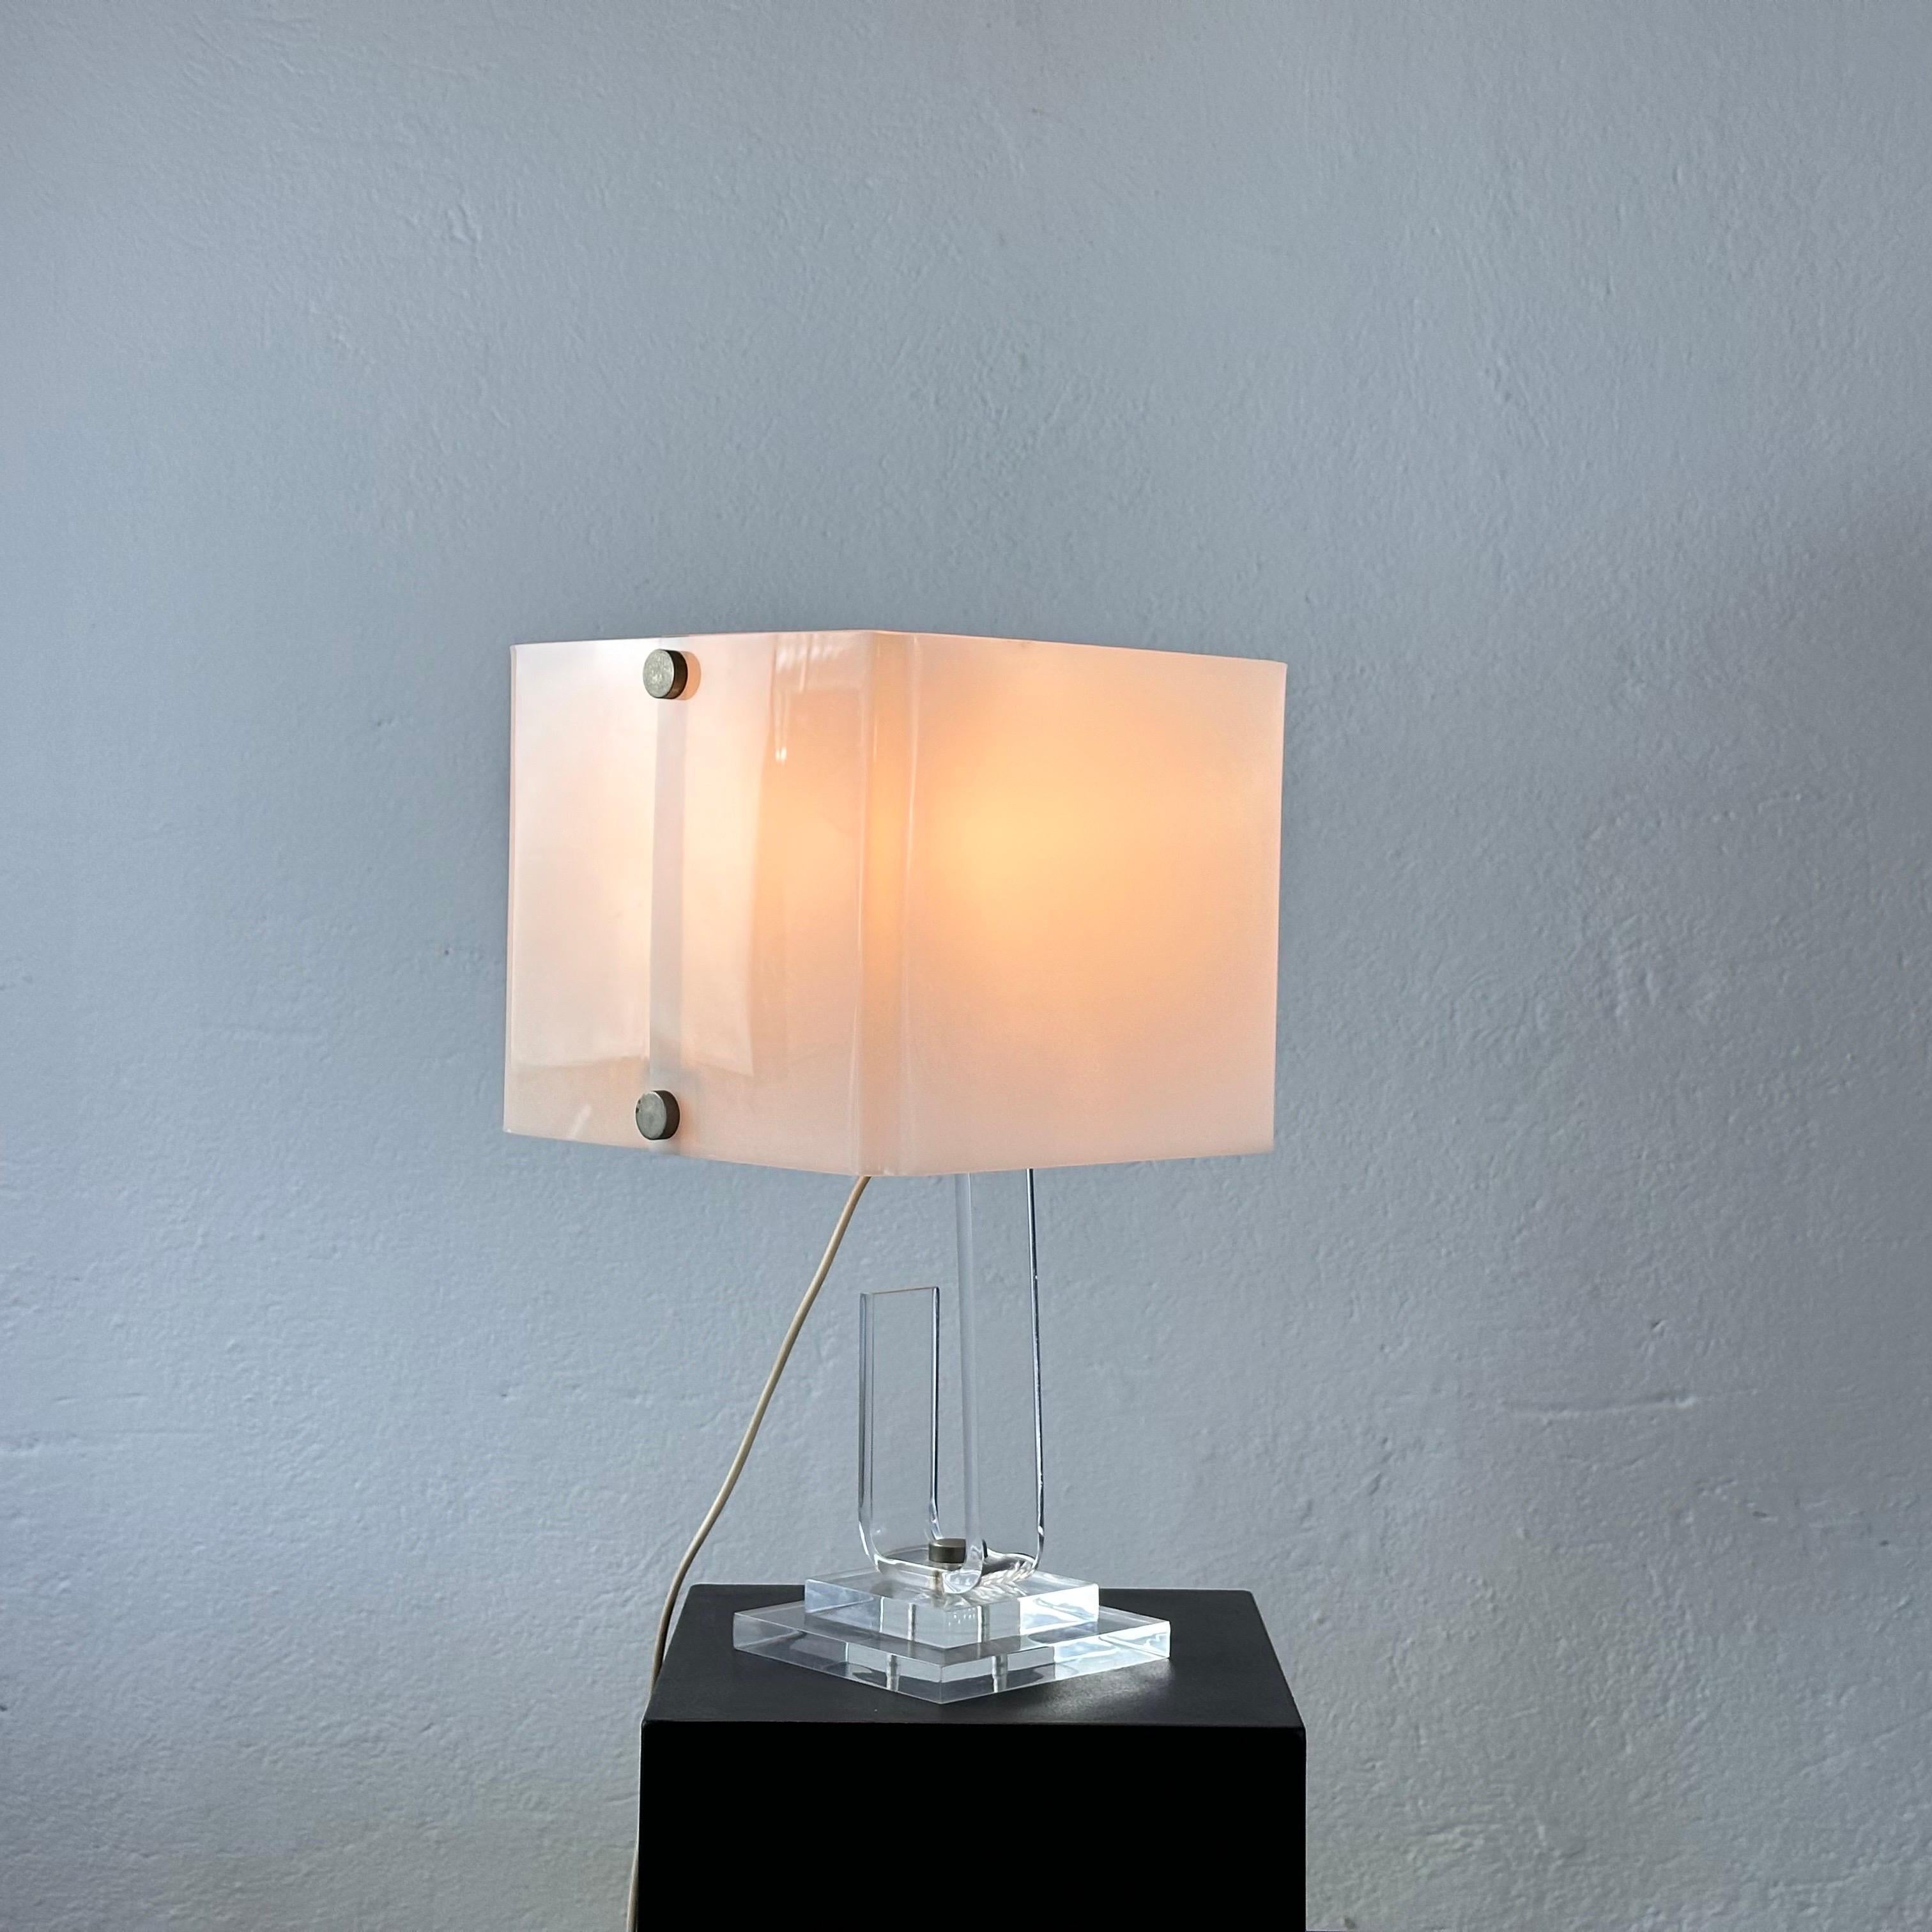 Mid-Century Modern Exquisite Sandro Petti Plexiglass and Brass Table Lamp from Rome, 1970s For Sale